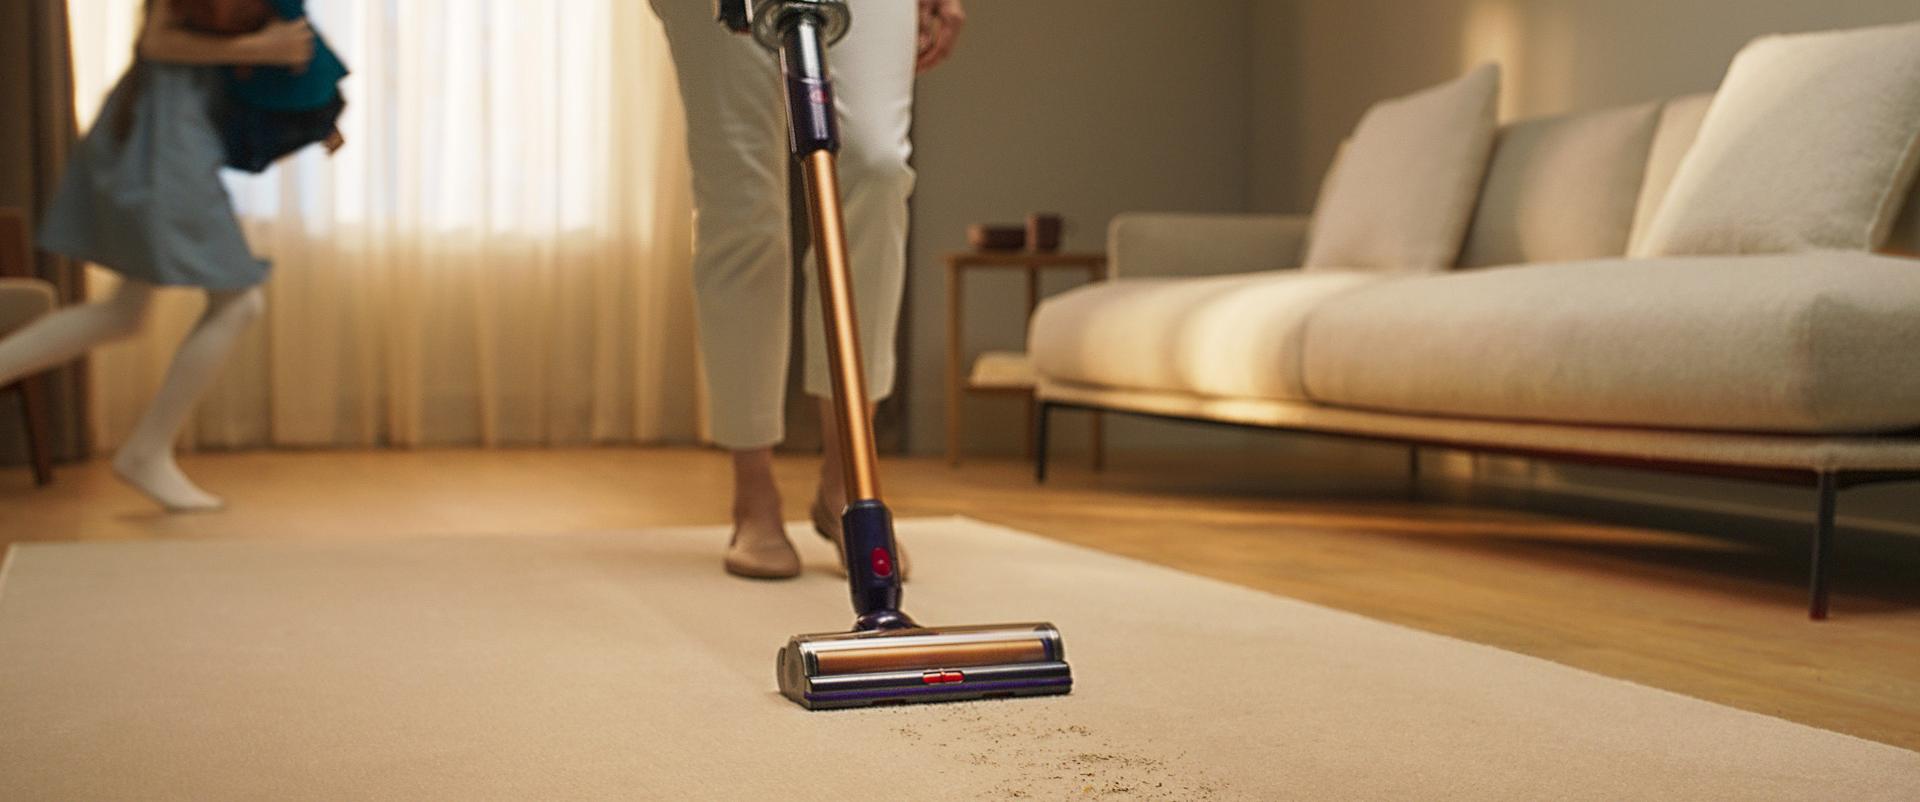 Dyson cordless stick vacuums cleaning around the home with laser